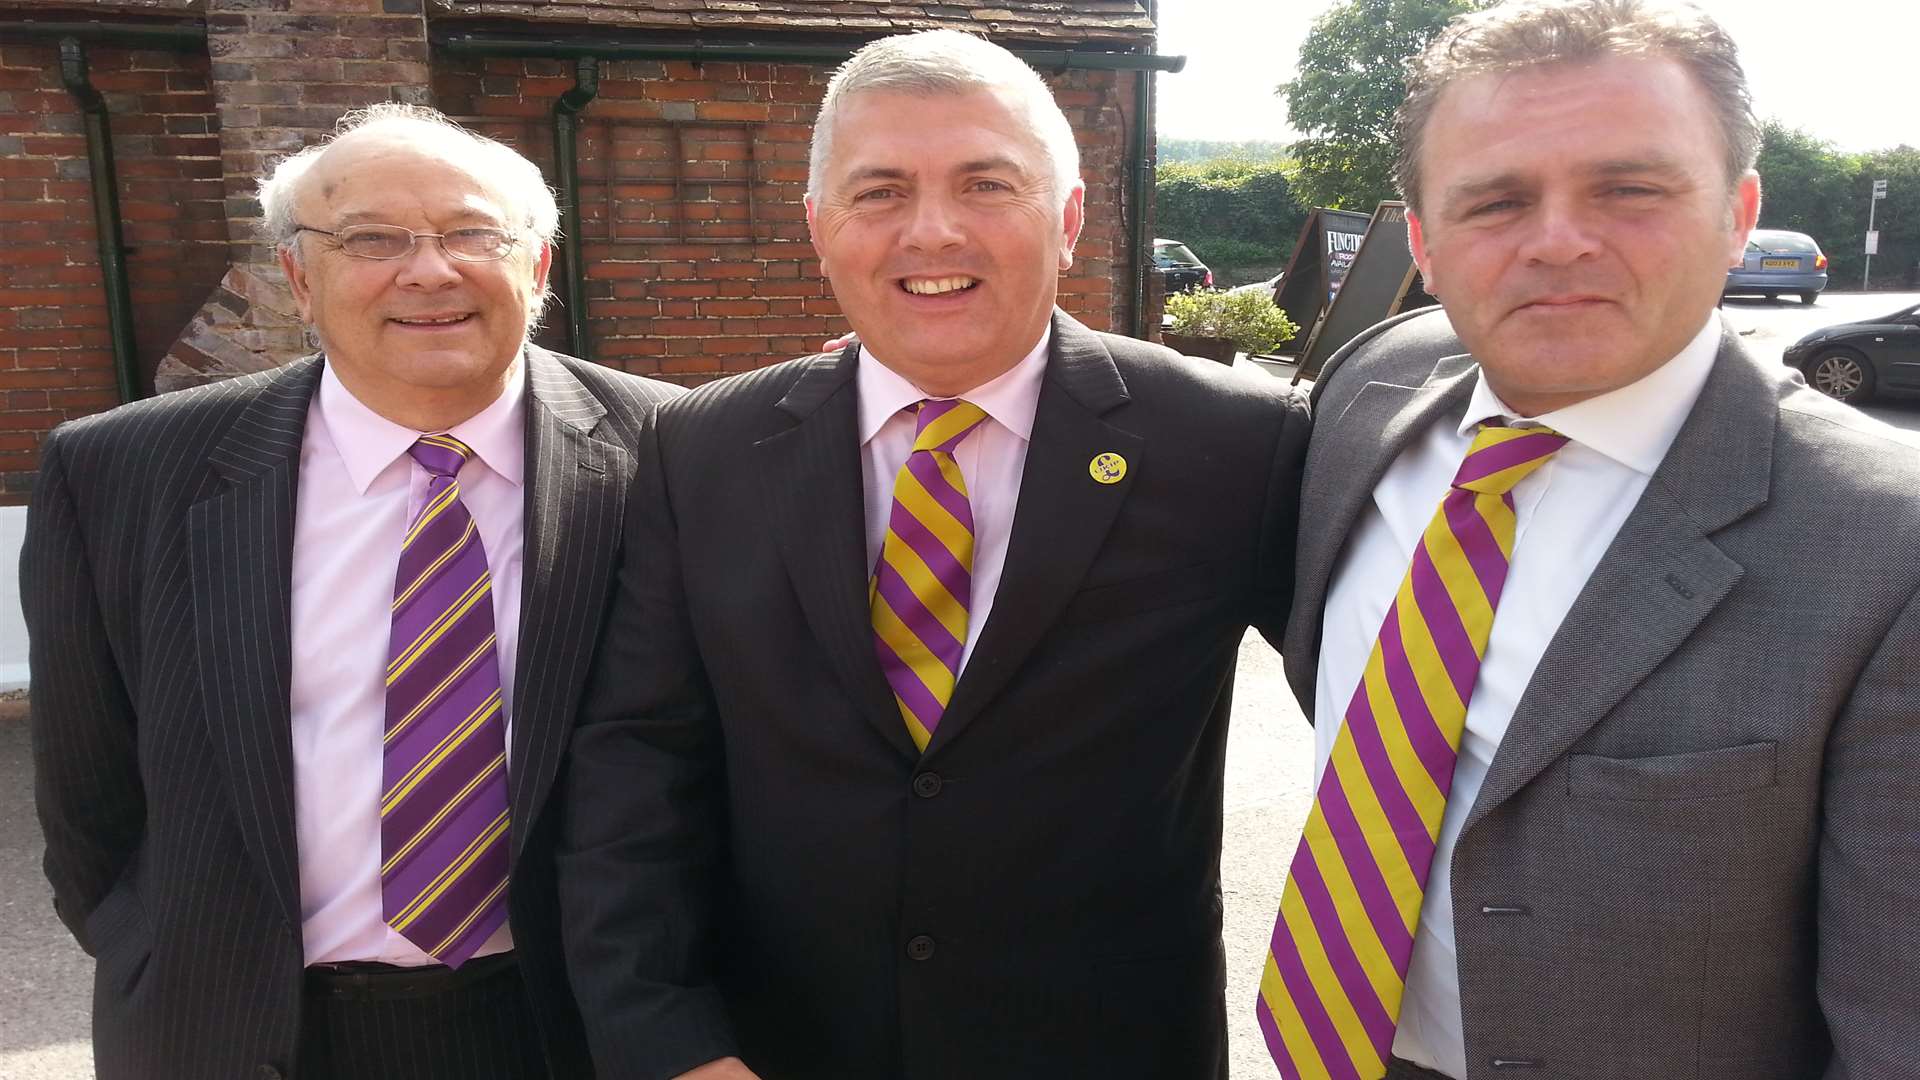 Colin Nicholson has been chosen to represent Ukip at the General Election in 2015